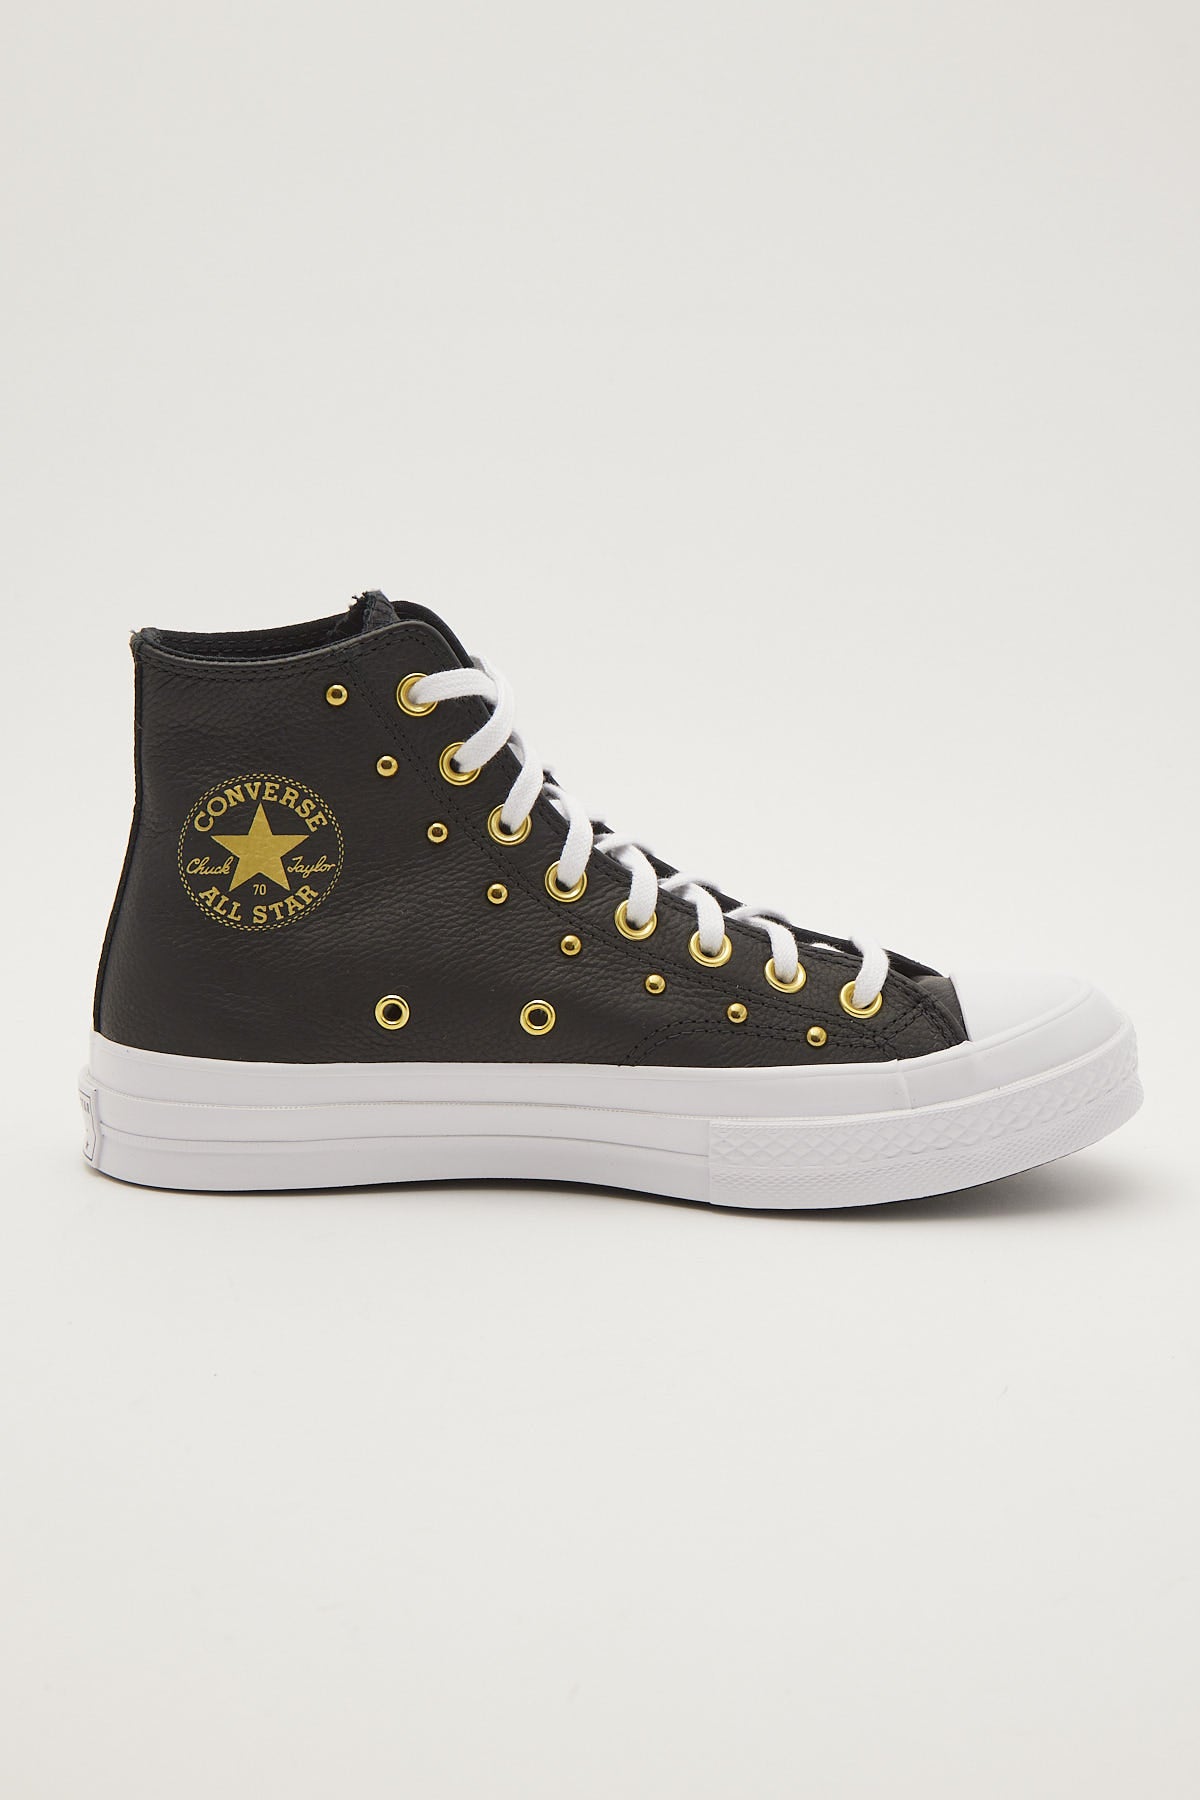 Converse Chuck 70 Leather Star Studded Black/White/Gold